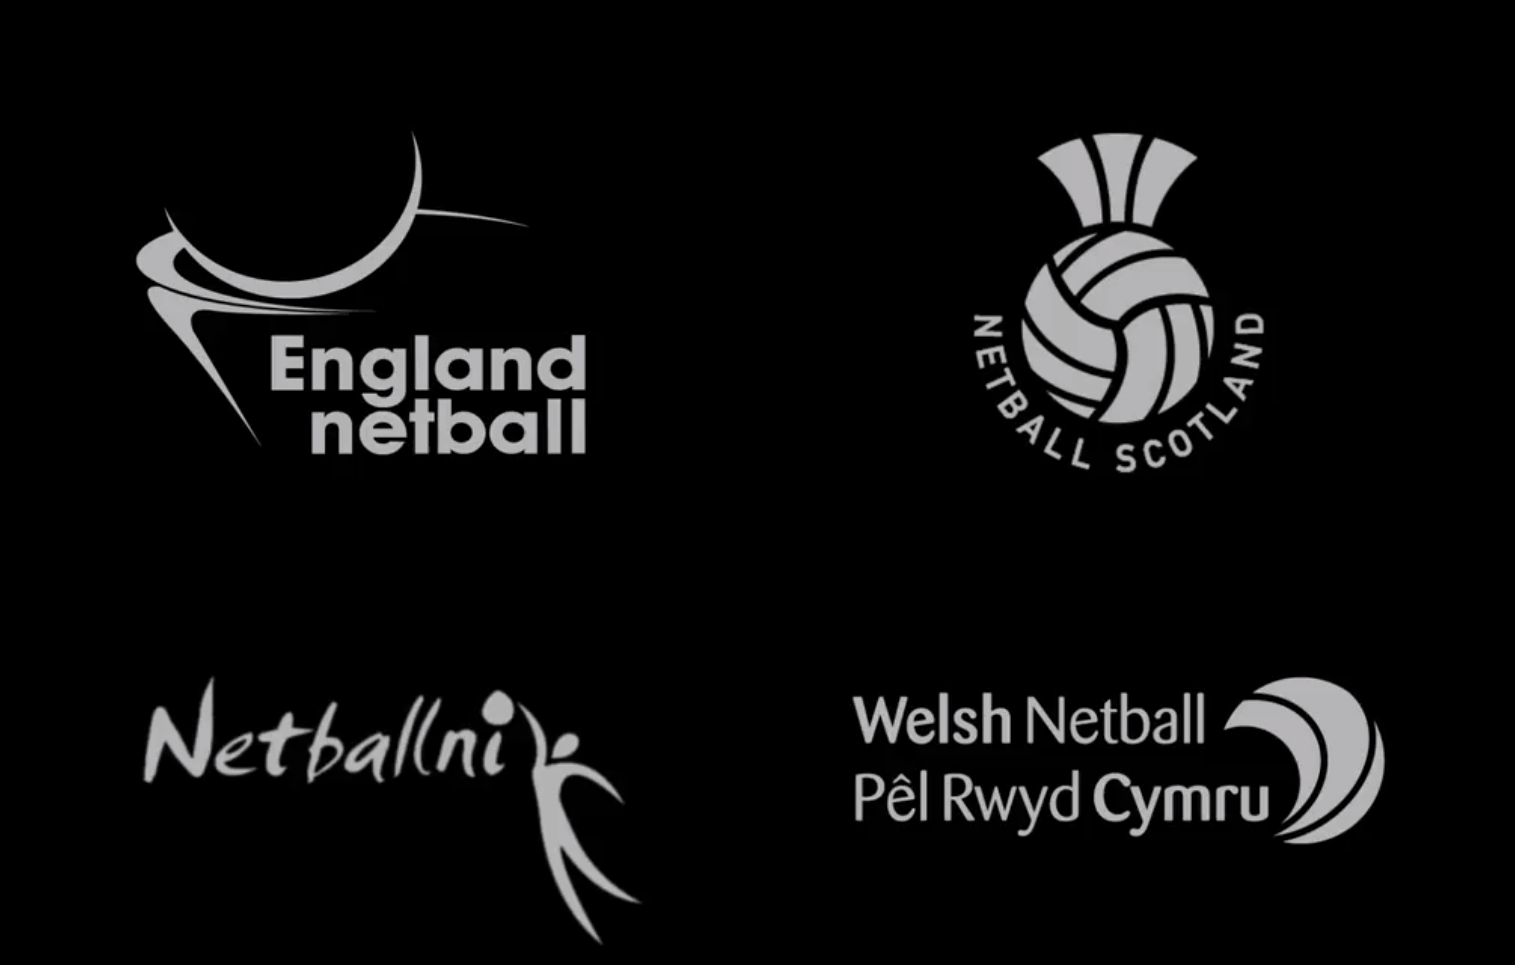 Home nations partner to encourage renewal of netball memberships